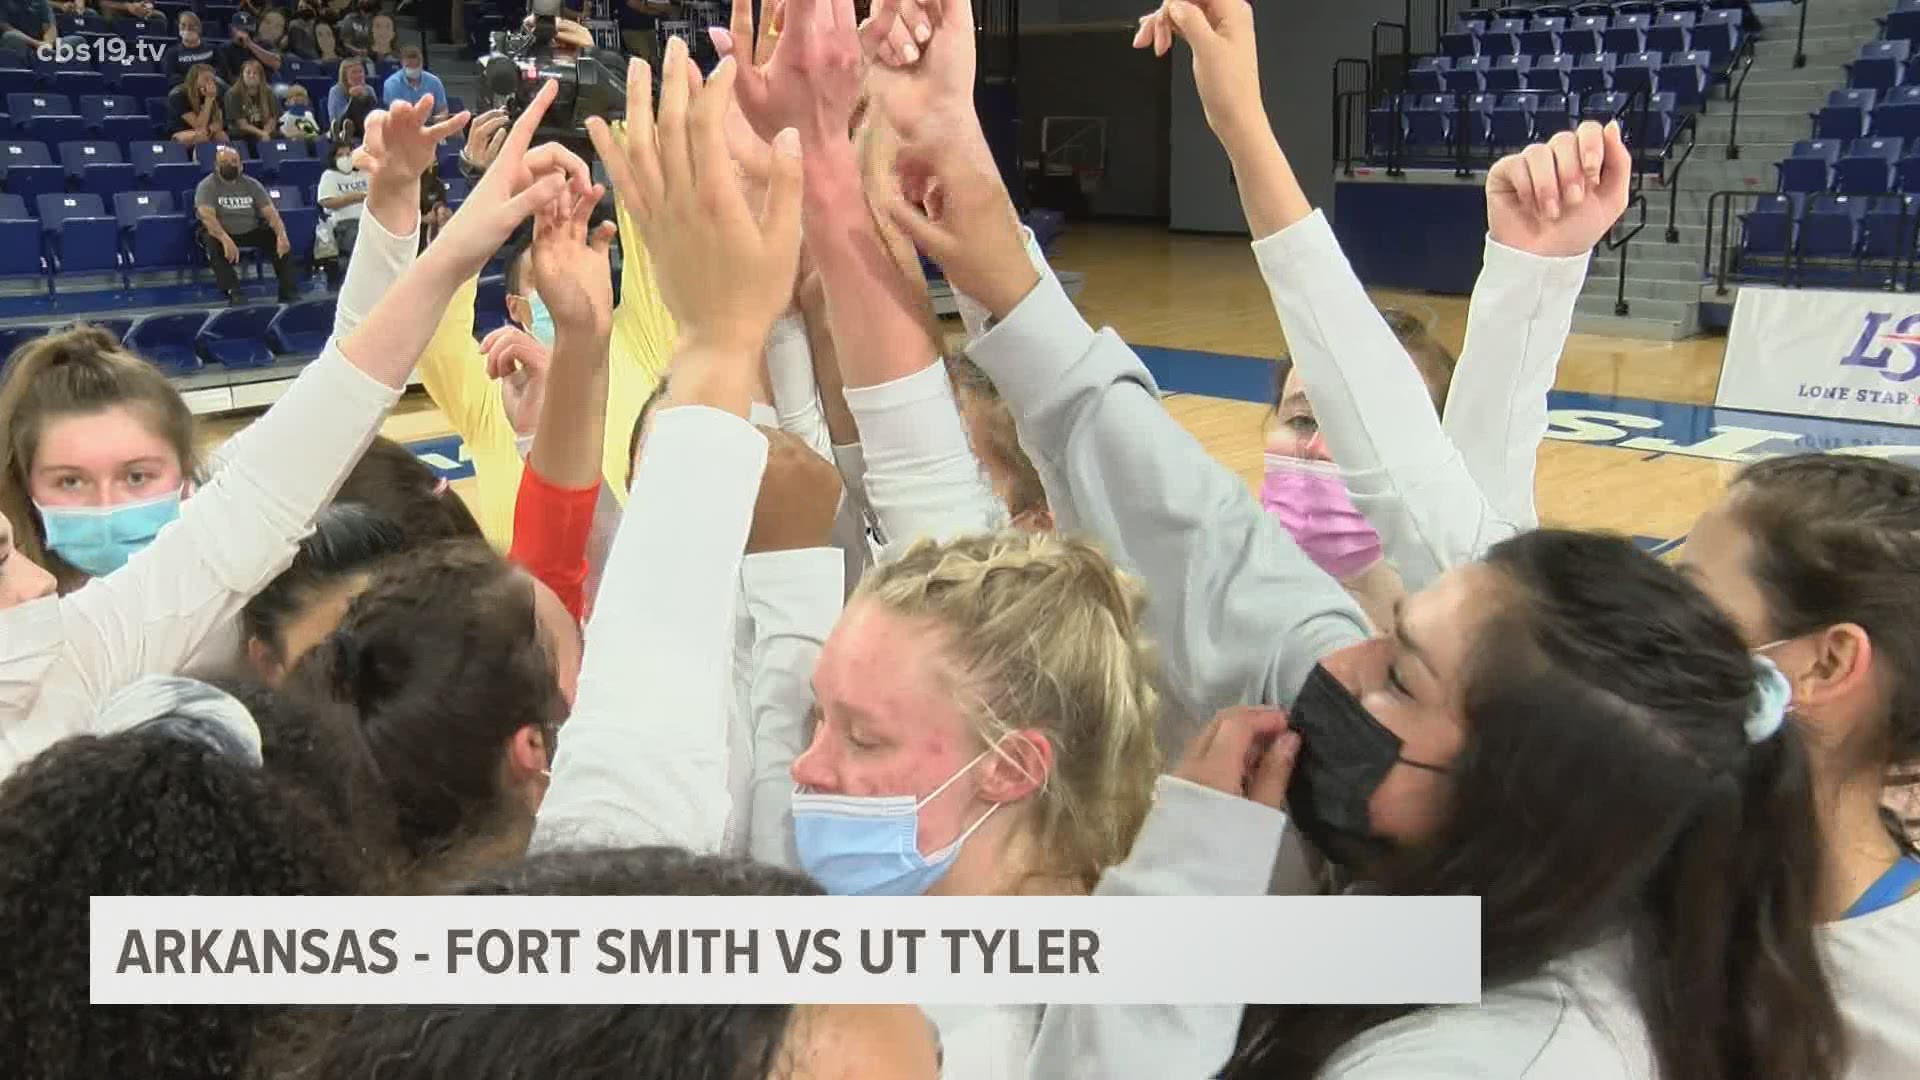 UT Tyler completes the clean sweep of the visitors from Arkansas Fort Smith to advance to the Lone Star Conference Tournament finals.